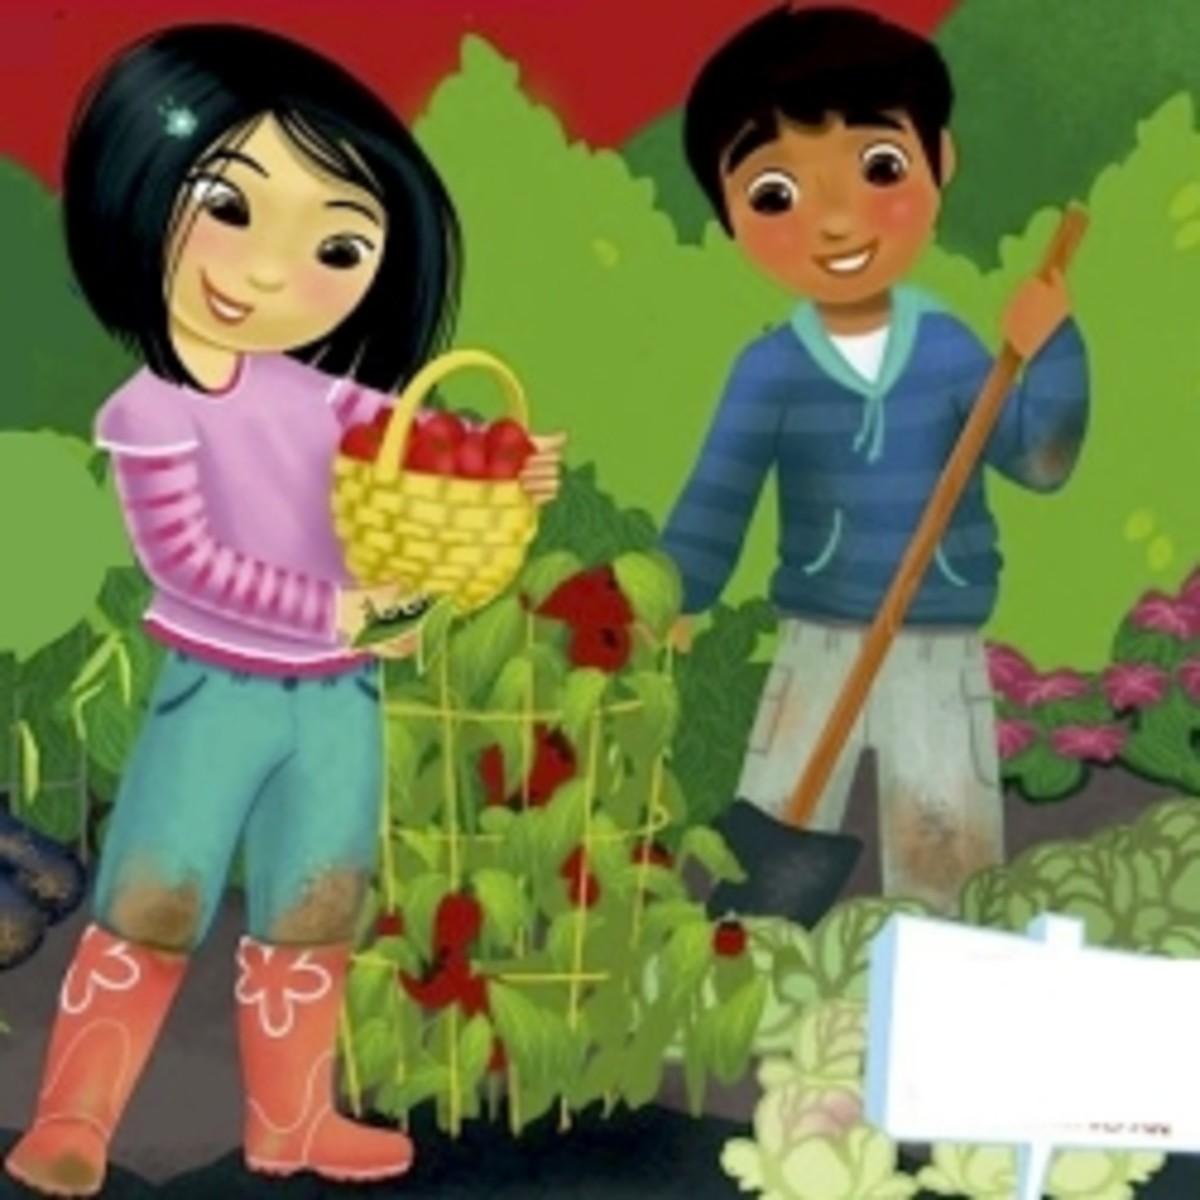 Detail of cover art from "Grow a Garden," a Gardening Book for Chlldren. The book is Available at 